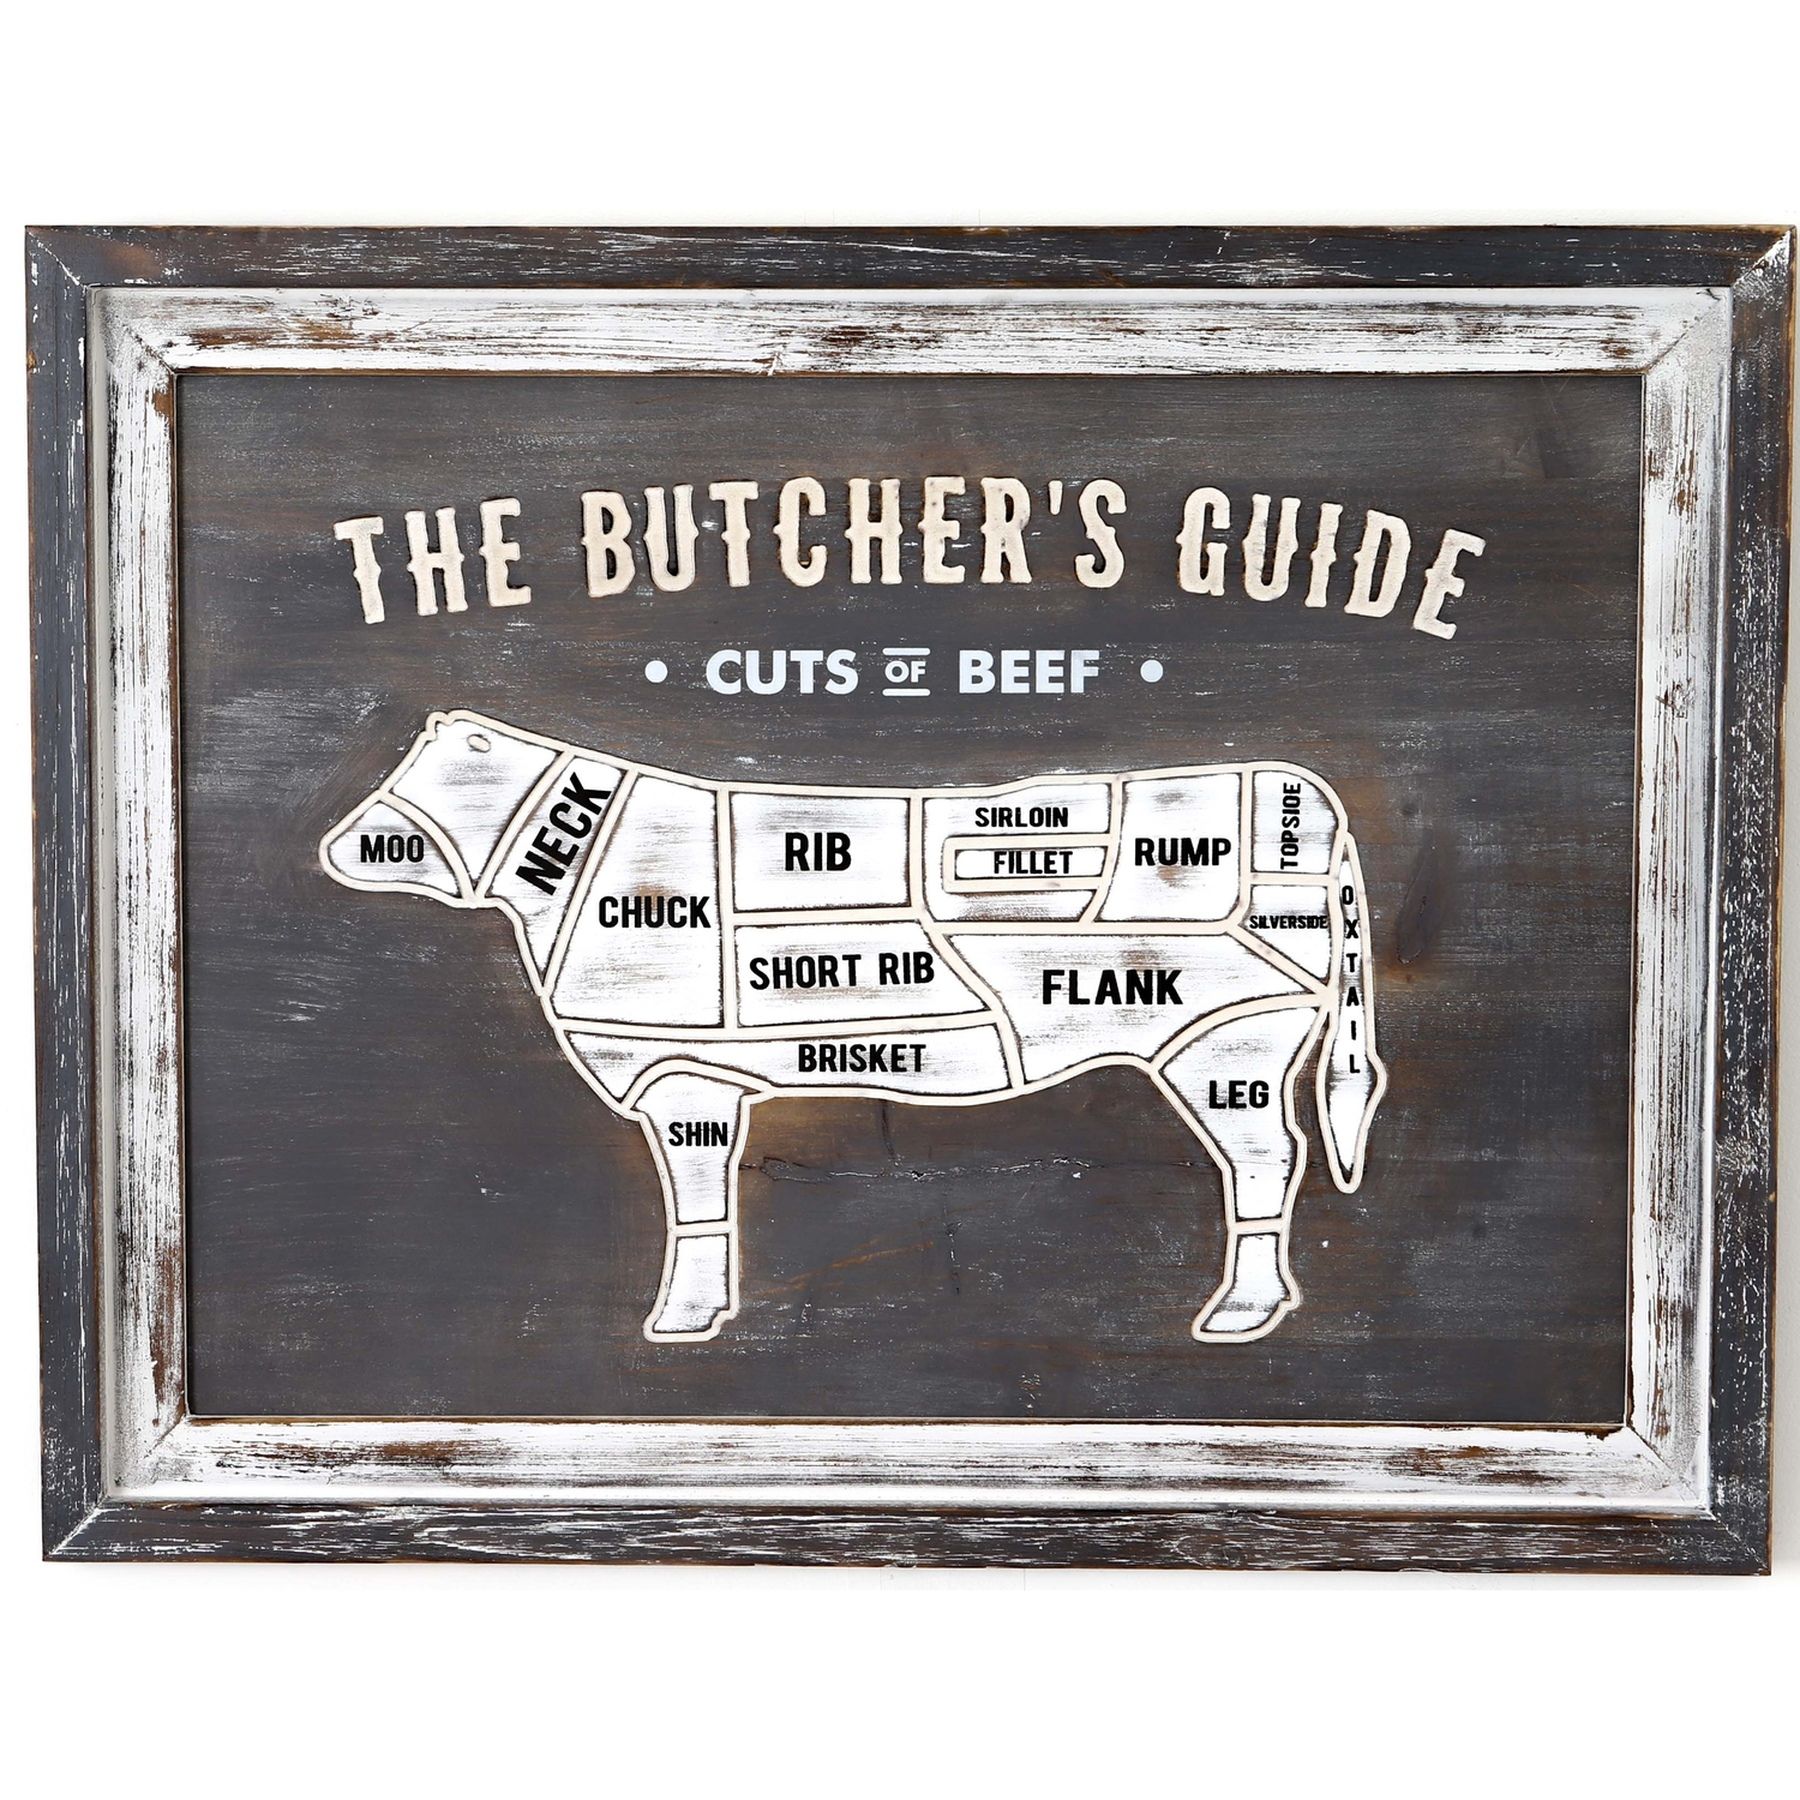 Butchers Cuts Beef Wall Plaque - Image 1